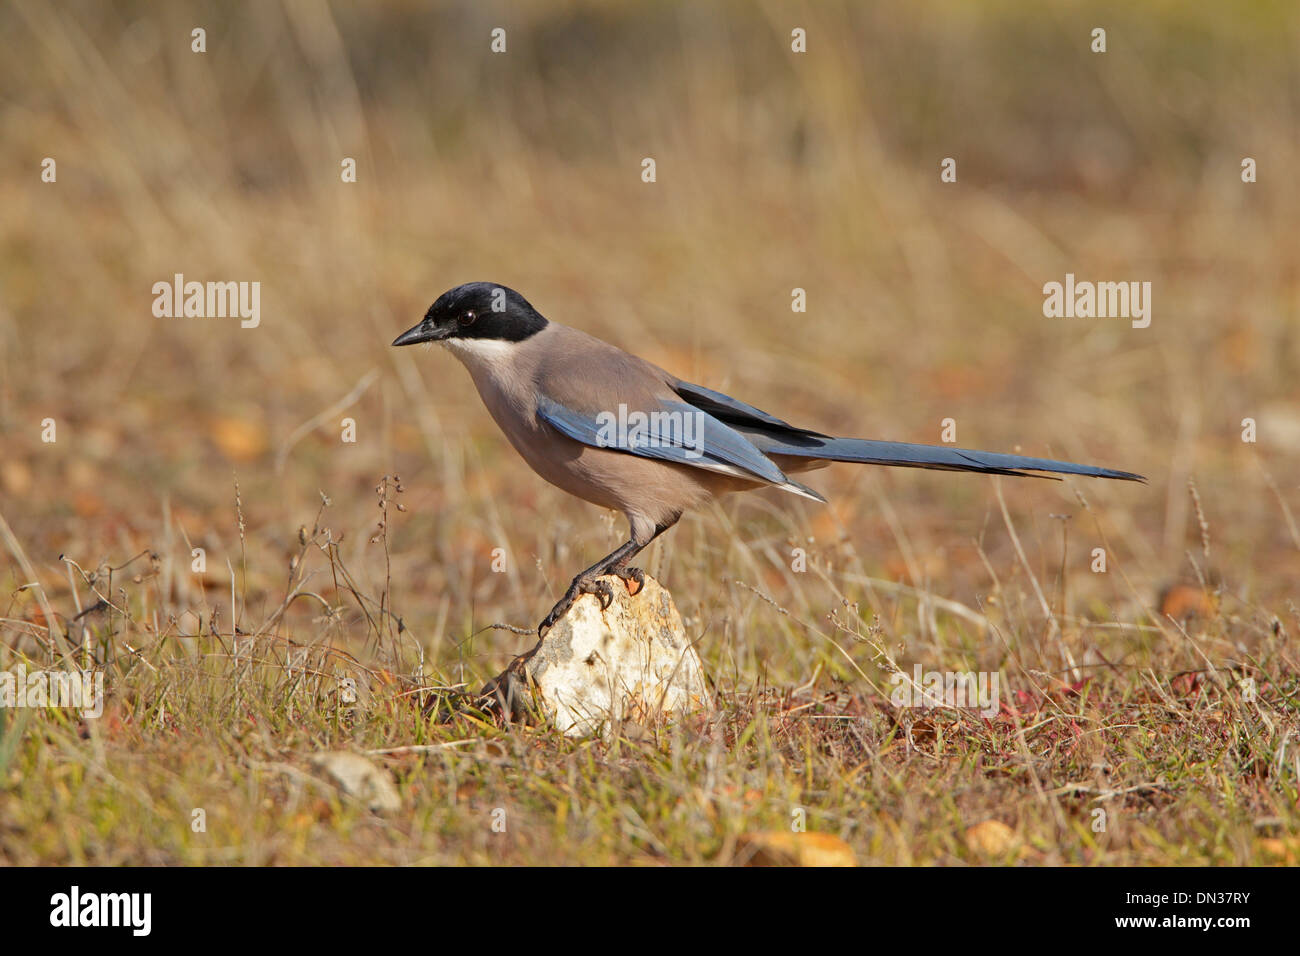 Azure-winged Magpie perched on a rock Stock Photo